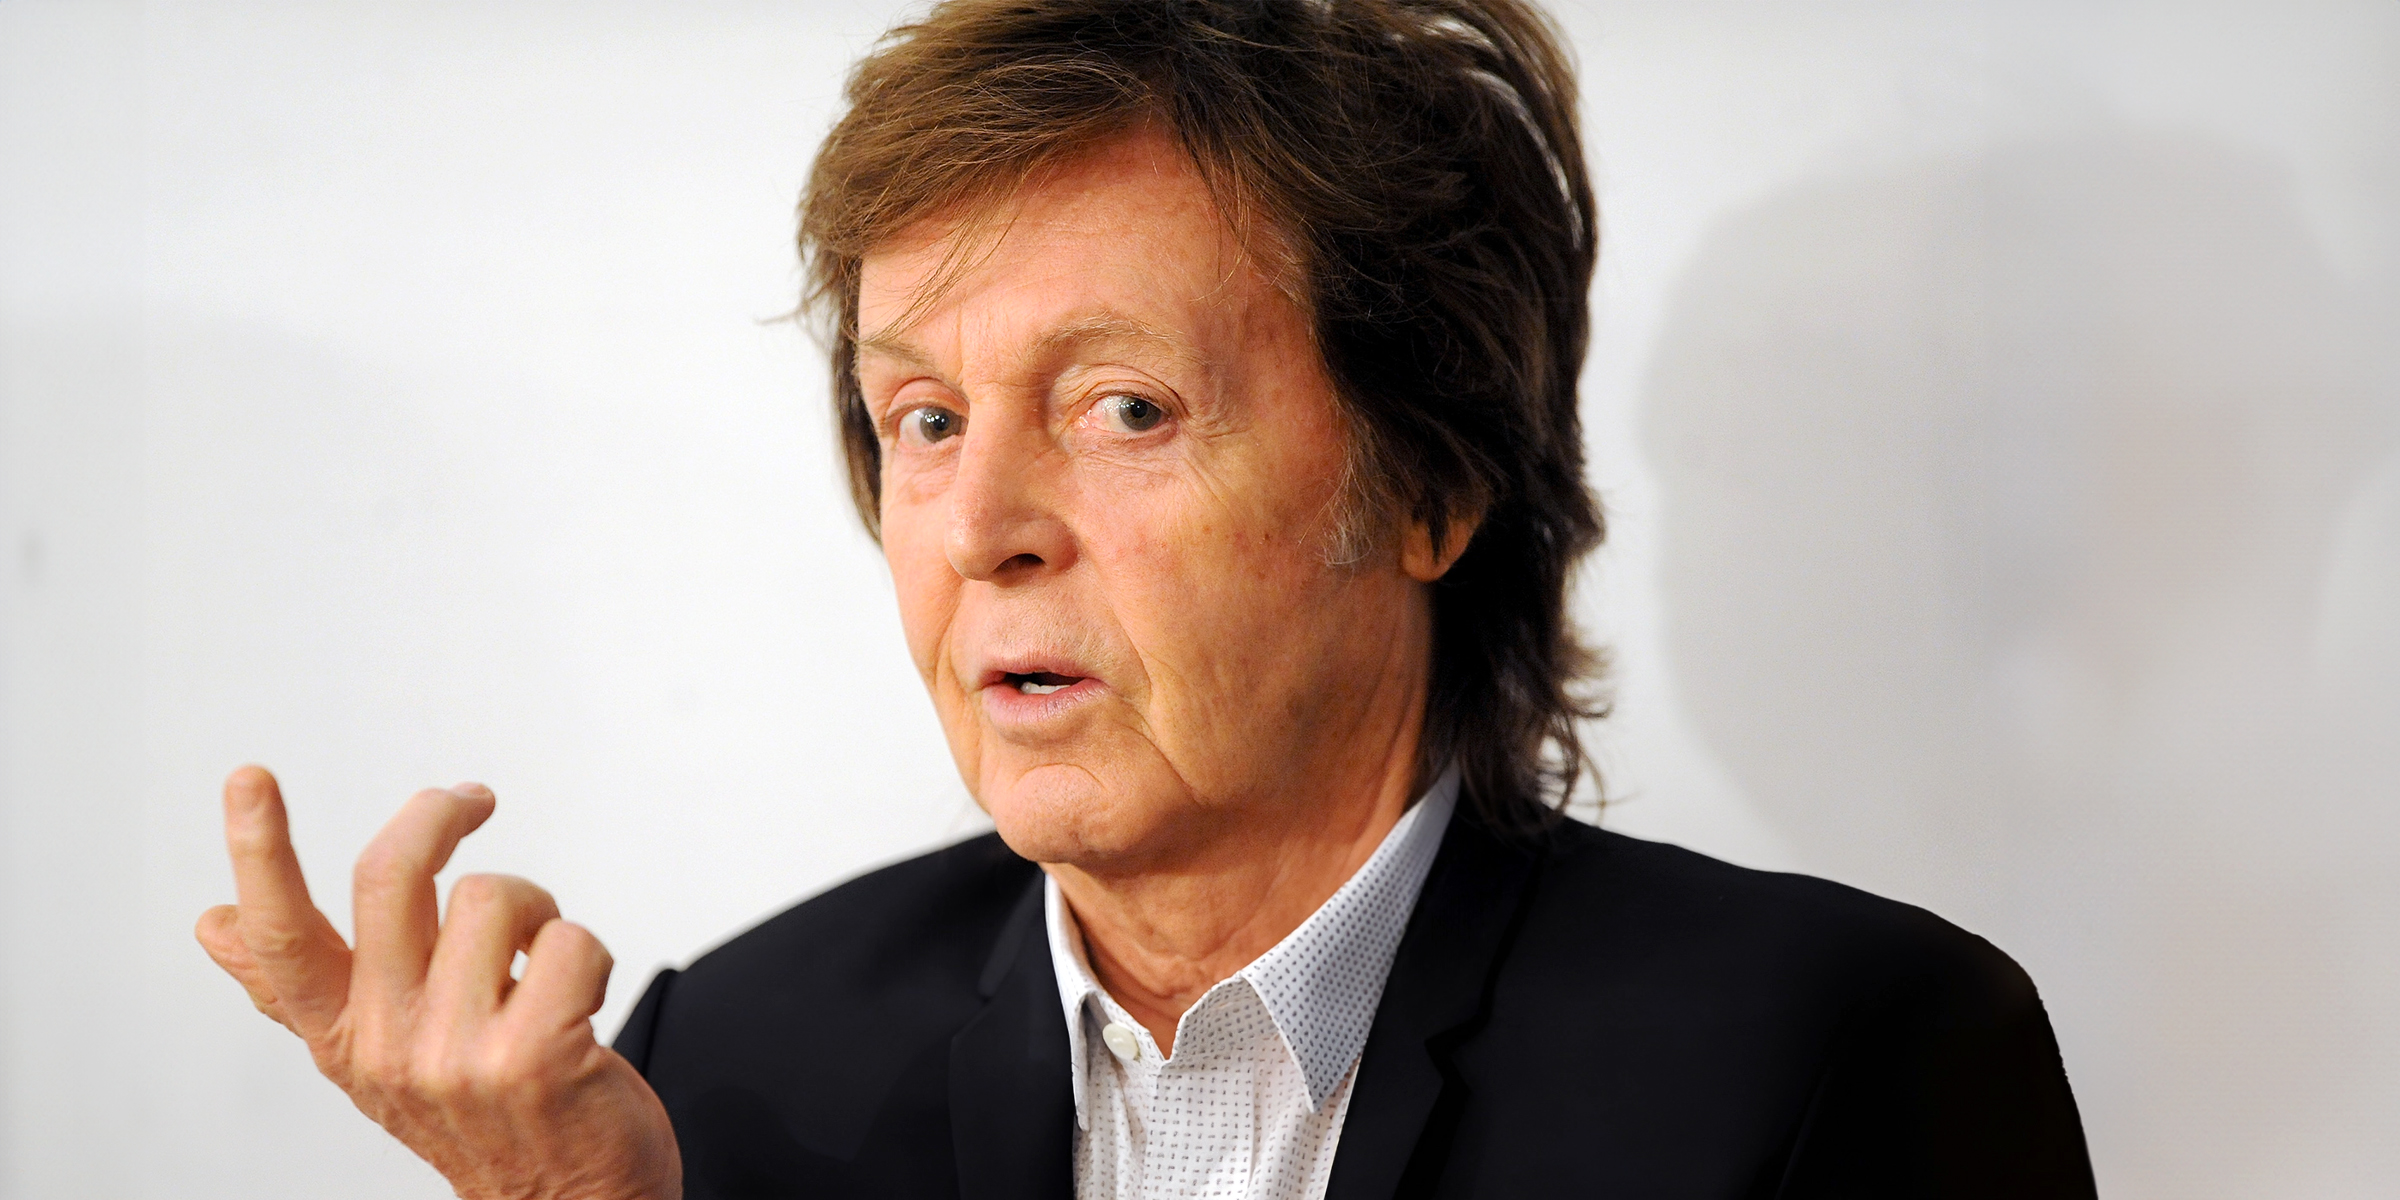 Paul McCartney | Source: Getty Images